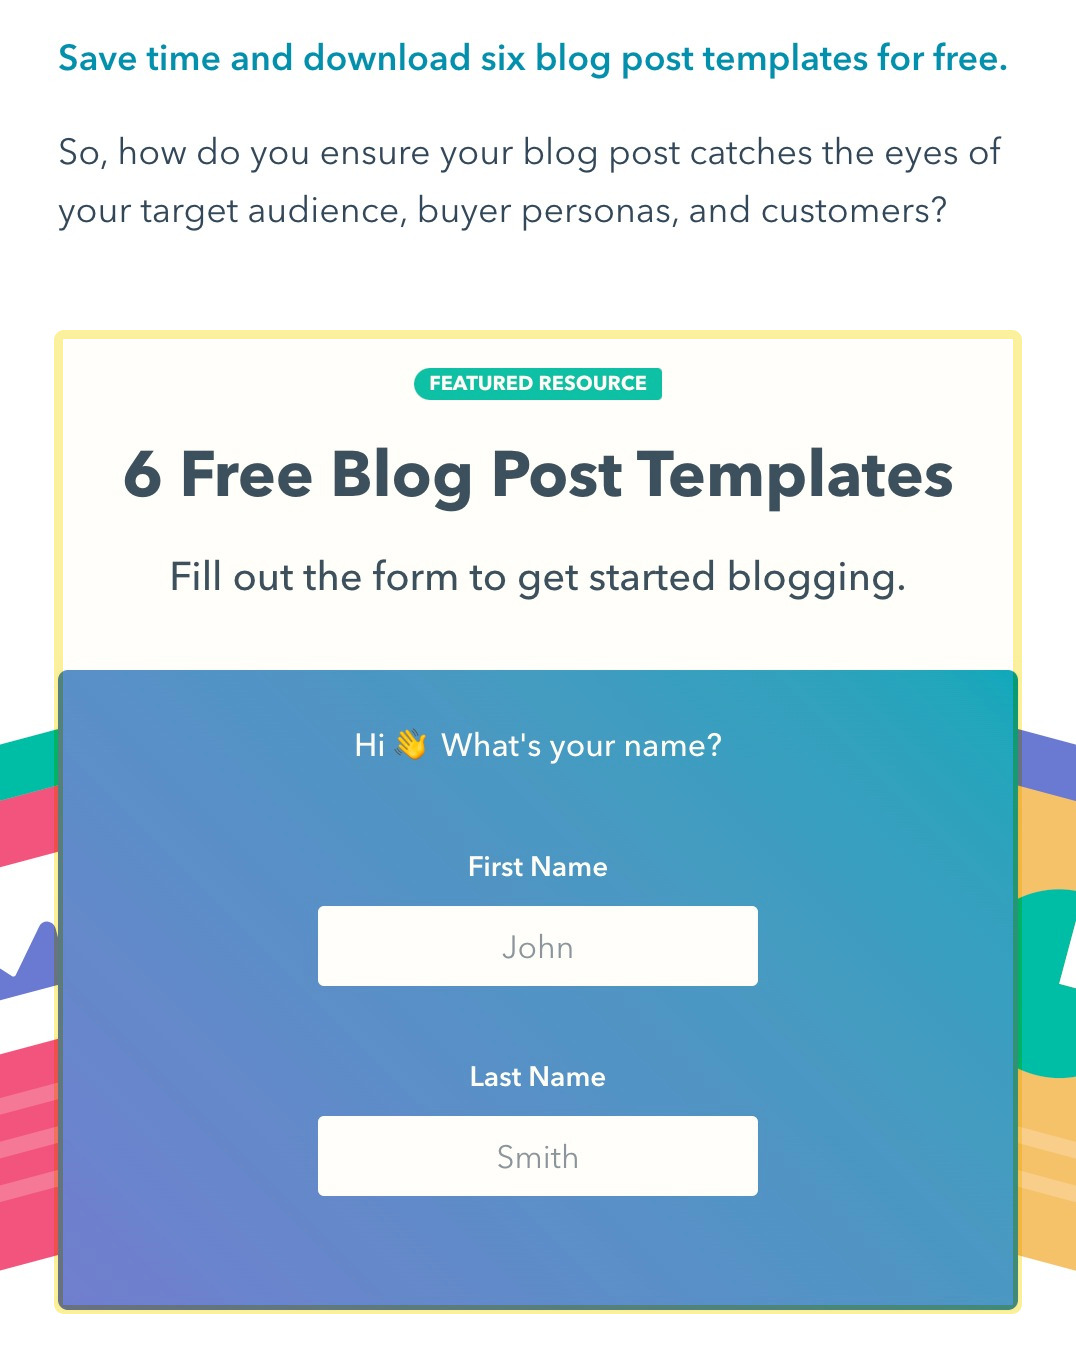 Example of lead capture form. In exchange, the website offers 6 free blog post templates 